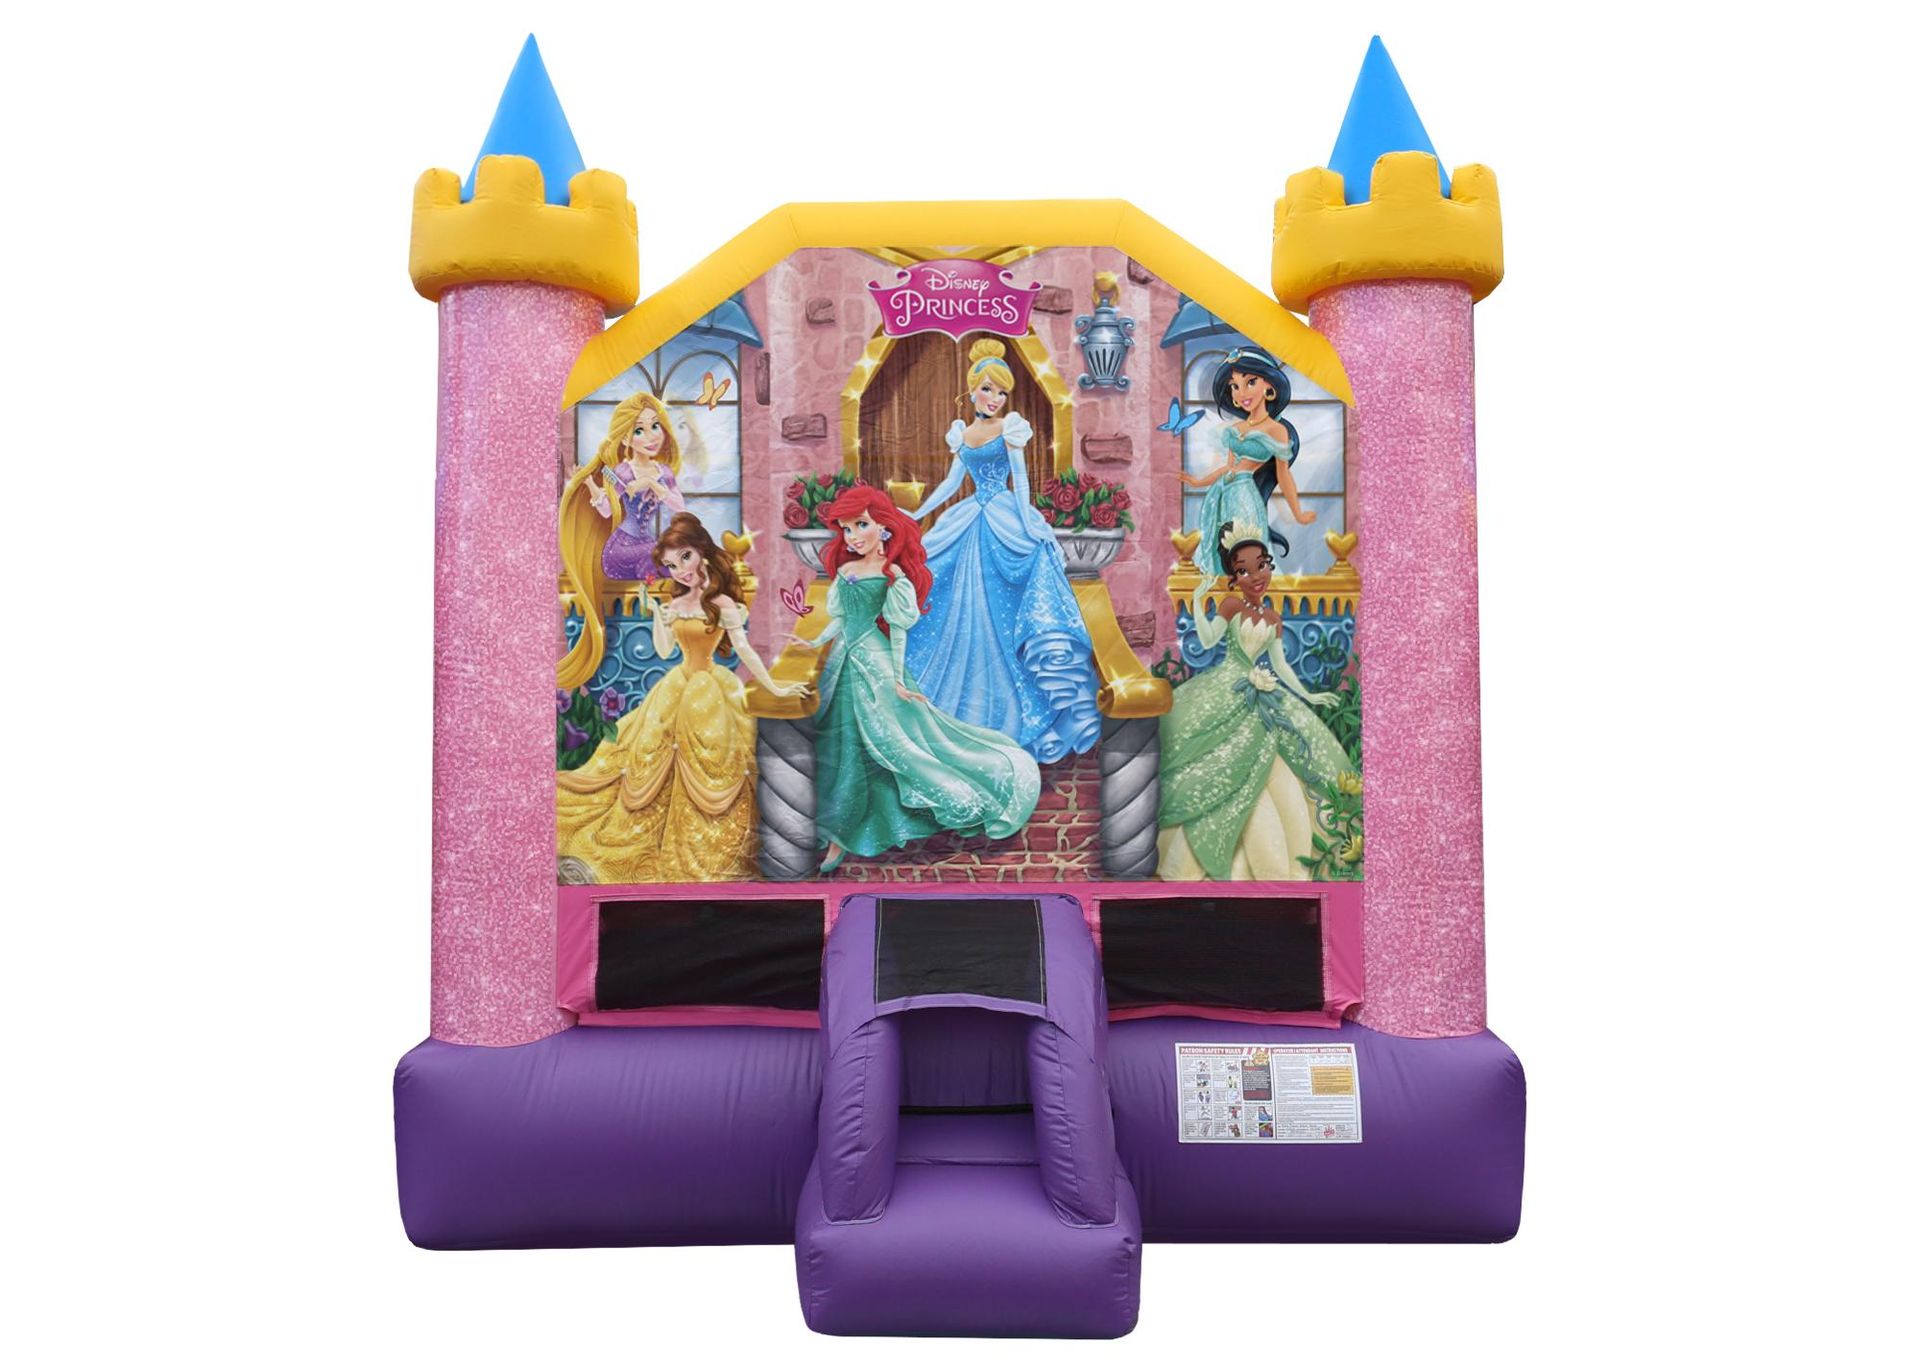 Pink and Purple with Disney Princess | Rancho Cucamonga, CA | Jam Jam Bounce House and Inflatable Party Rentals